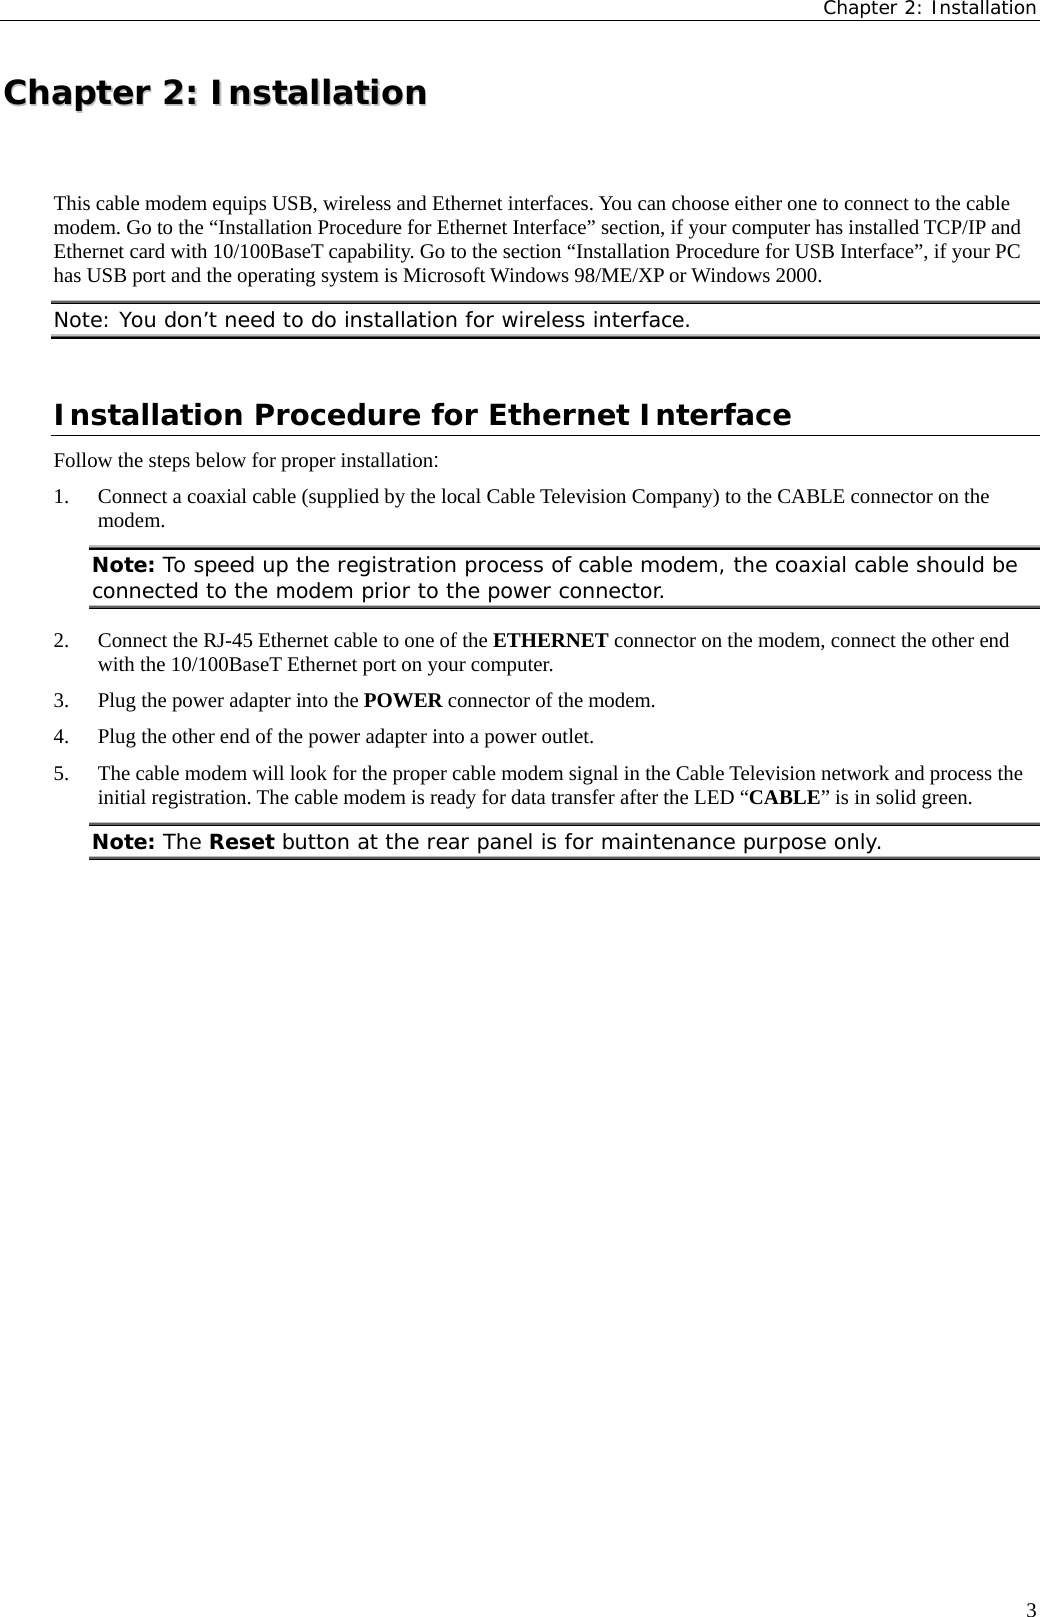 Chapter 2: Installation  CChhaapptteerr  22::  IInnssttaallllaattiioonn  This cable modem equips USB, wireless and Ethernet interfaces. You can choose either one to connect to the cable modem. Go to the “Installation Procedure for Ethernet Interface” section, if your computer has installed TCP/IP and Ethernet card with 10/100BaseT capability. Go to the section “Installation Procedure for USB Interface”, if your PC has USB port and the operating system is Microsoft Windows 98/ME/XP or Windows 2000. Note: You don’t need to do installation for wireless interface. Installation Procedure for Ethernet Interface Follow the steps below for proper installation: 1. Connect a coaxial cable (supplied by the local Cable Television Company) to the CABLE connector on the modem. Note: To speed up the registration process of cable modem, the coaxial cable should be connected to the modem prior to the power connector. 2. Connect the RJ-45 Ethernet cable to one of the ETHERNET connector on the modem, connect the other end with the 10/100BaseT Ethernet port on your computer. 3. Plug the power adapter into the POWER connector of the modem. 4. Plug the other end of the power adapter into a power outlet. 5. The cable modem will look for the proper cable modem signal in the Cable Television network and process the initial registration. The cable modem is ready for data transfer after the LED “CABLE” is in solid green. Note: The Reset button at the rear panel is for maintenance purpose only.    3